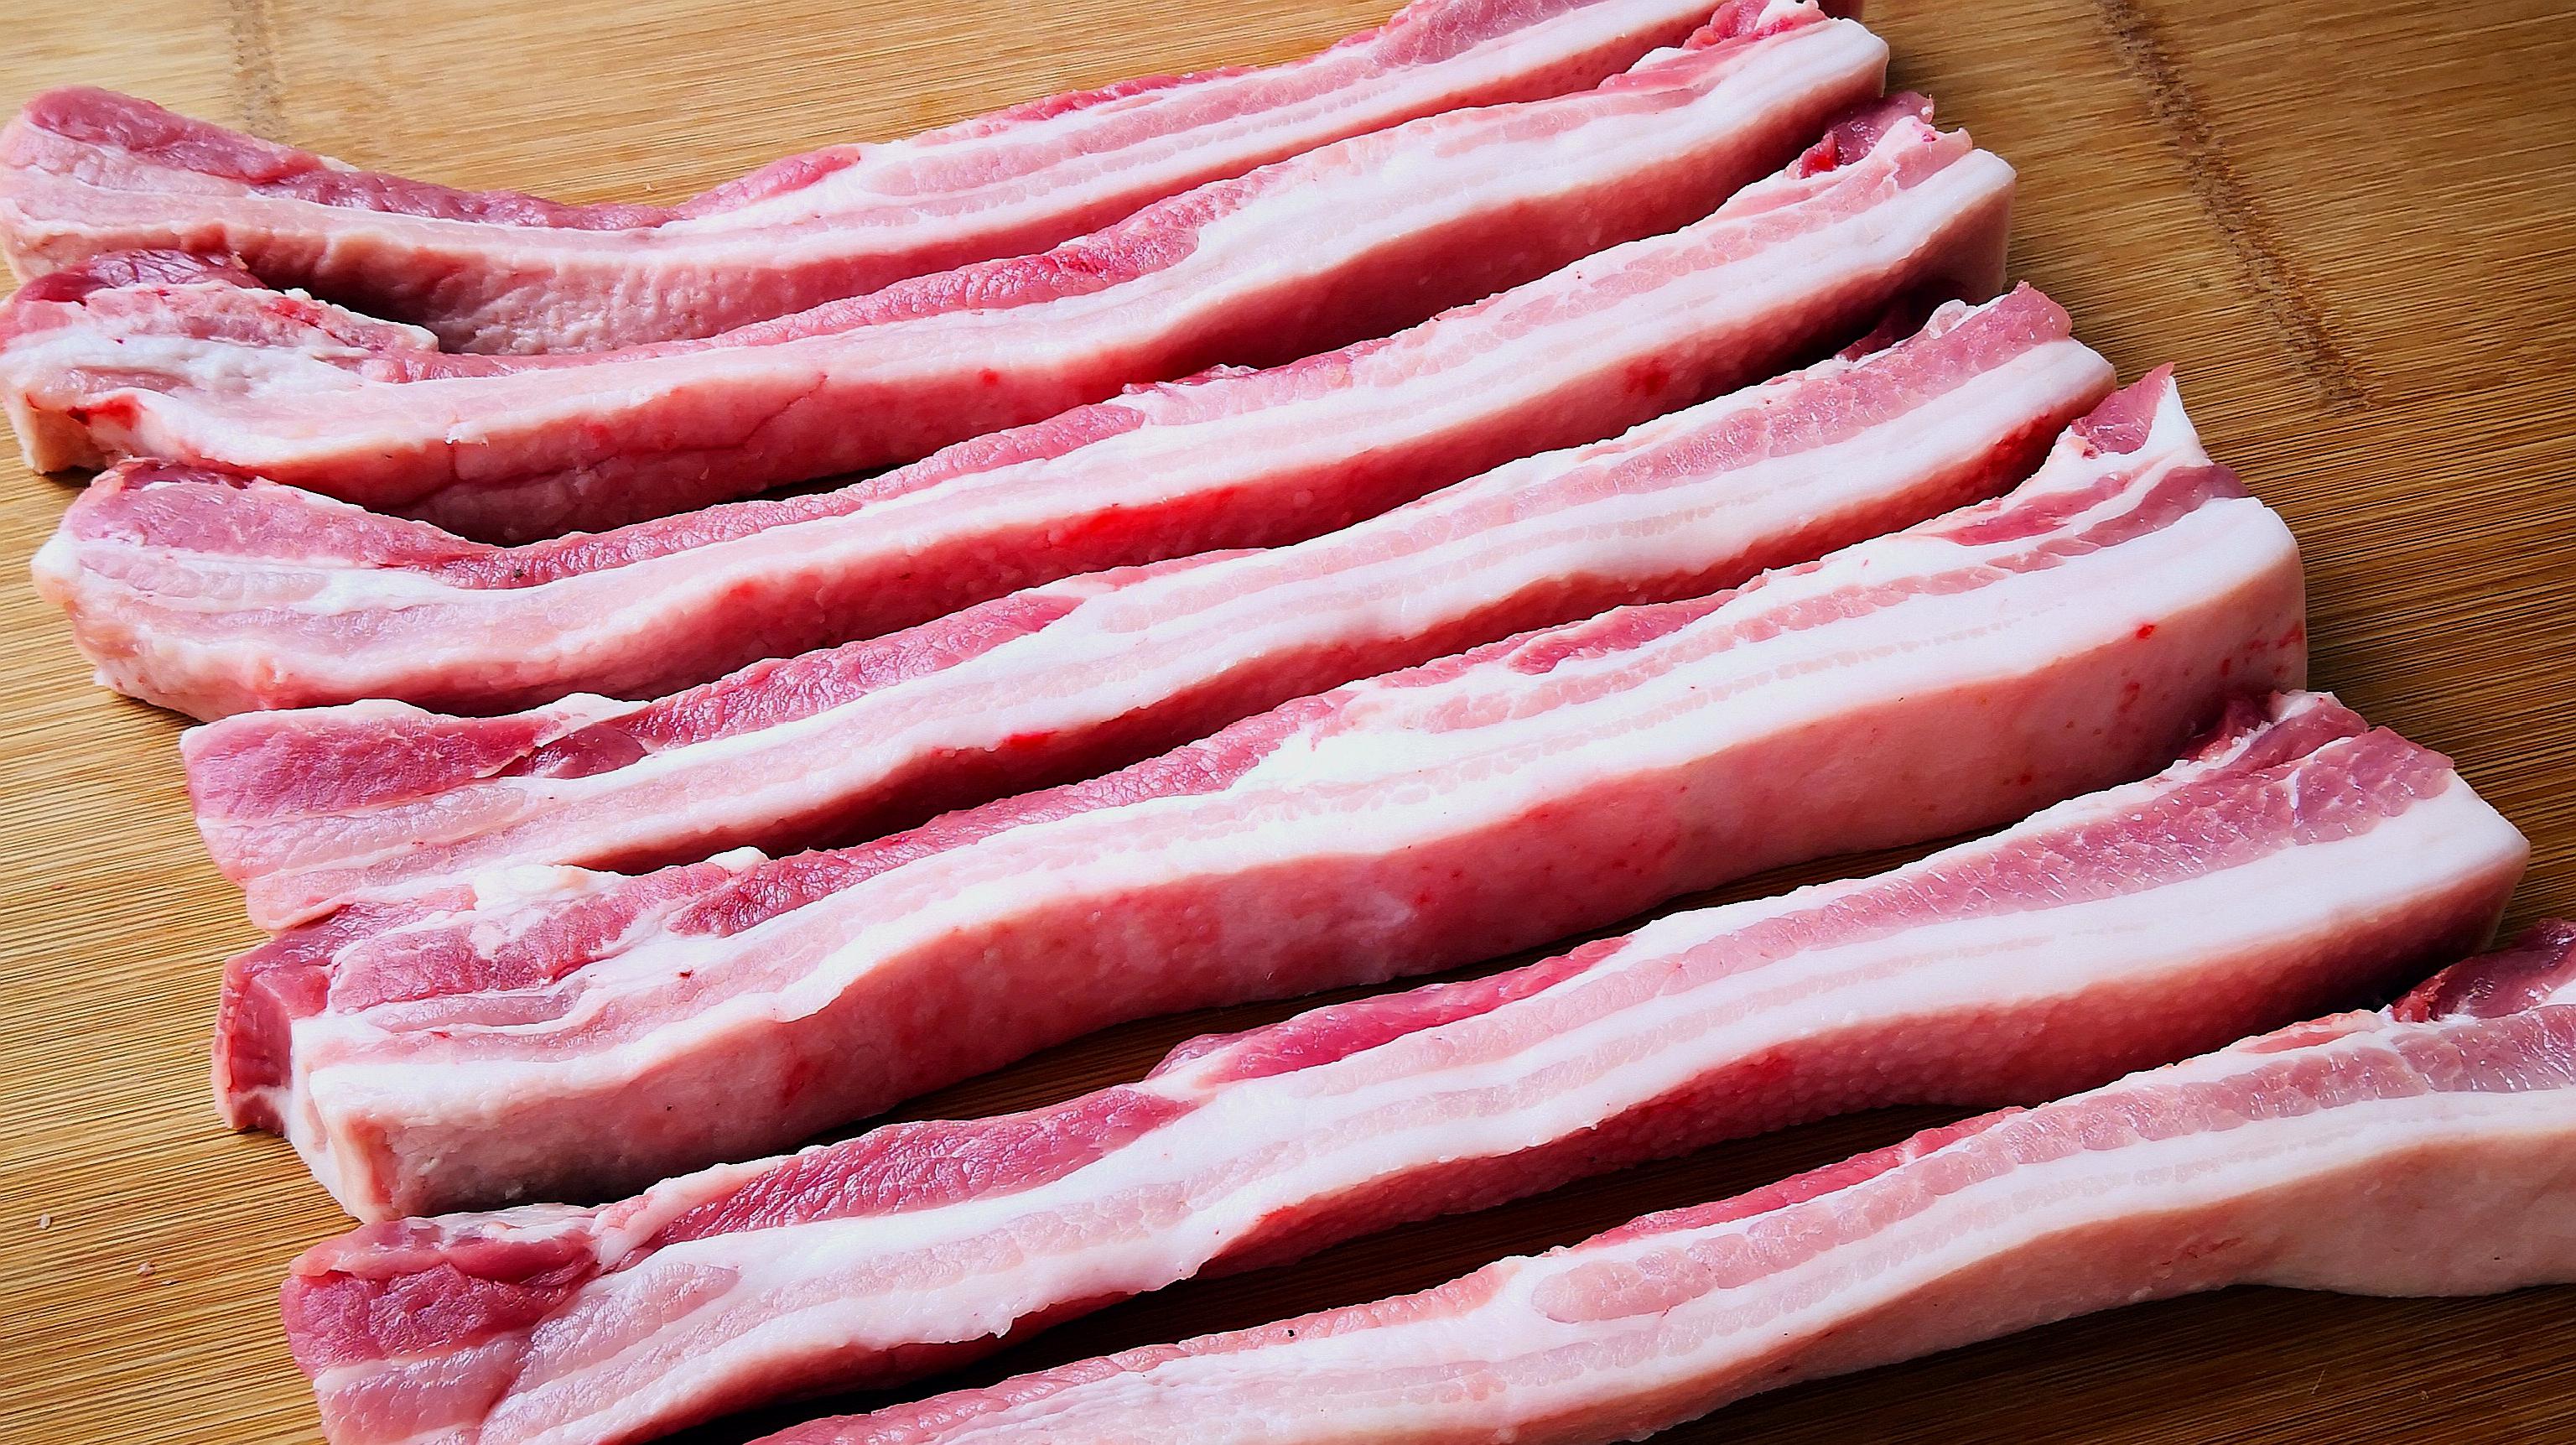 How to choose pork belly